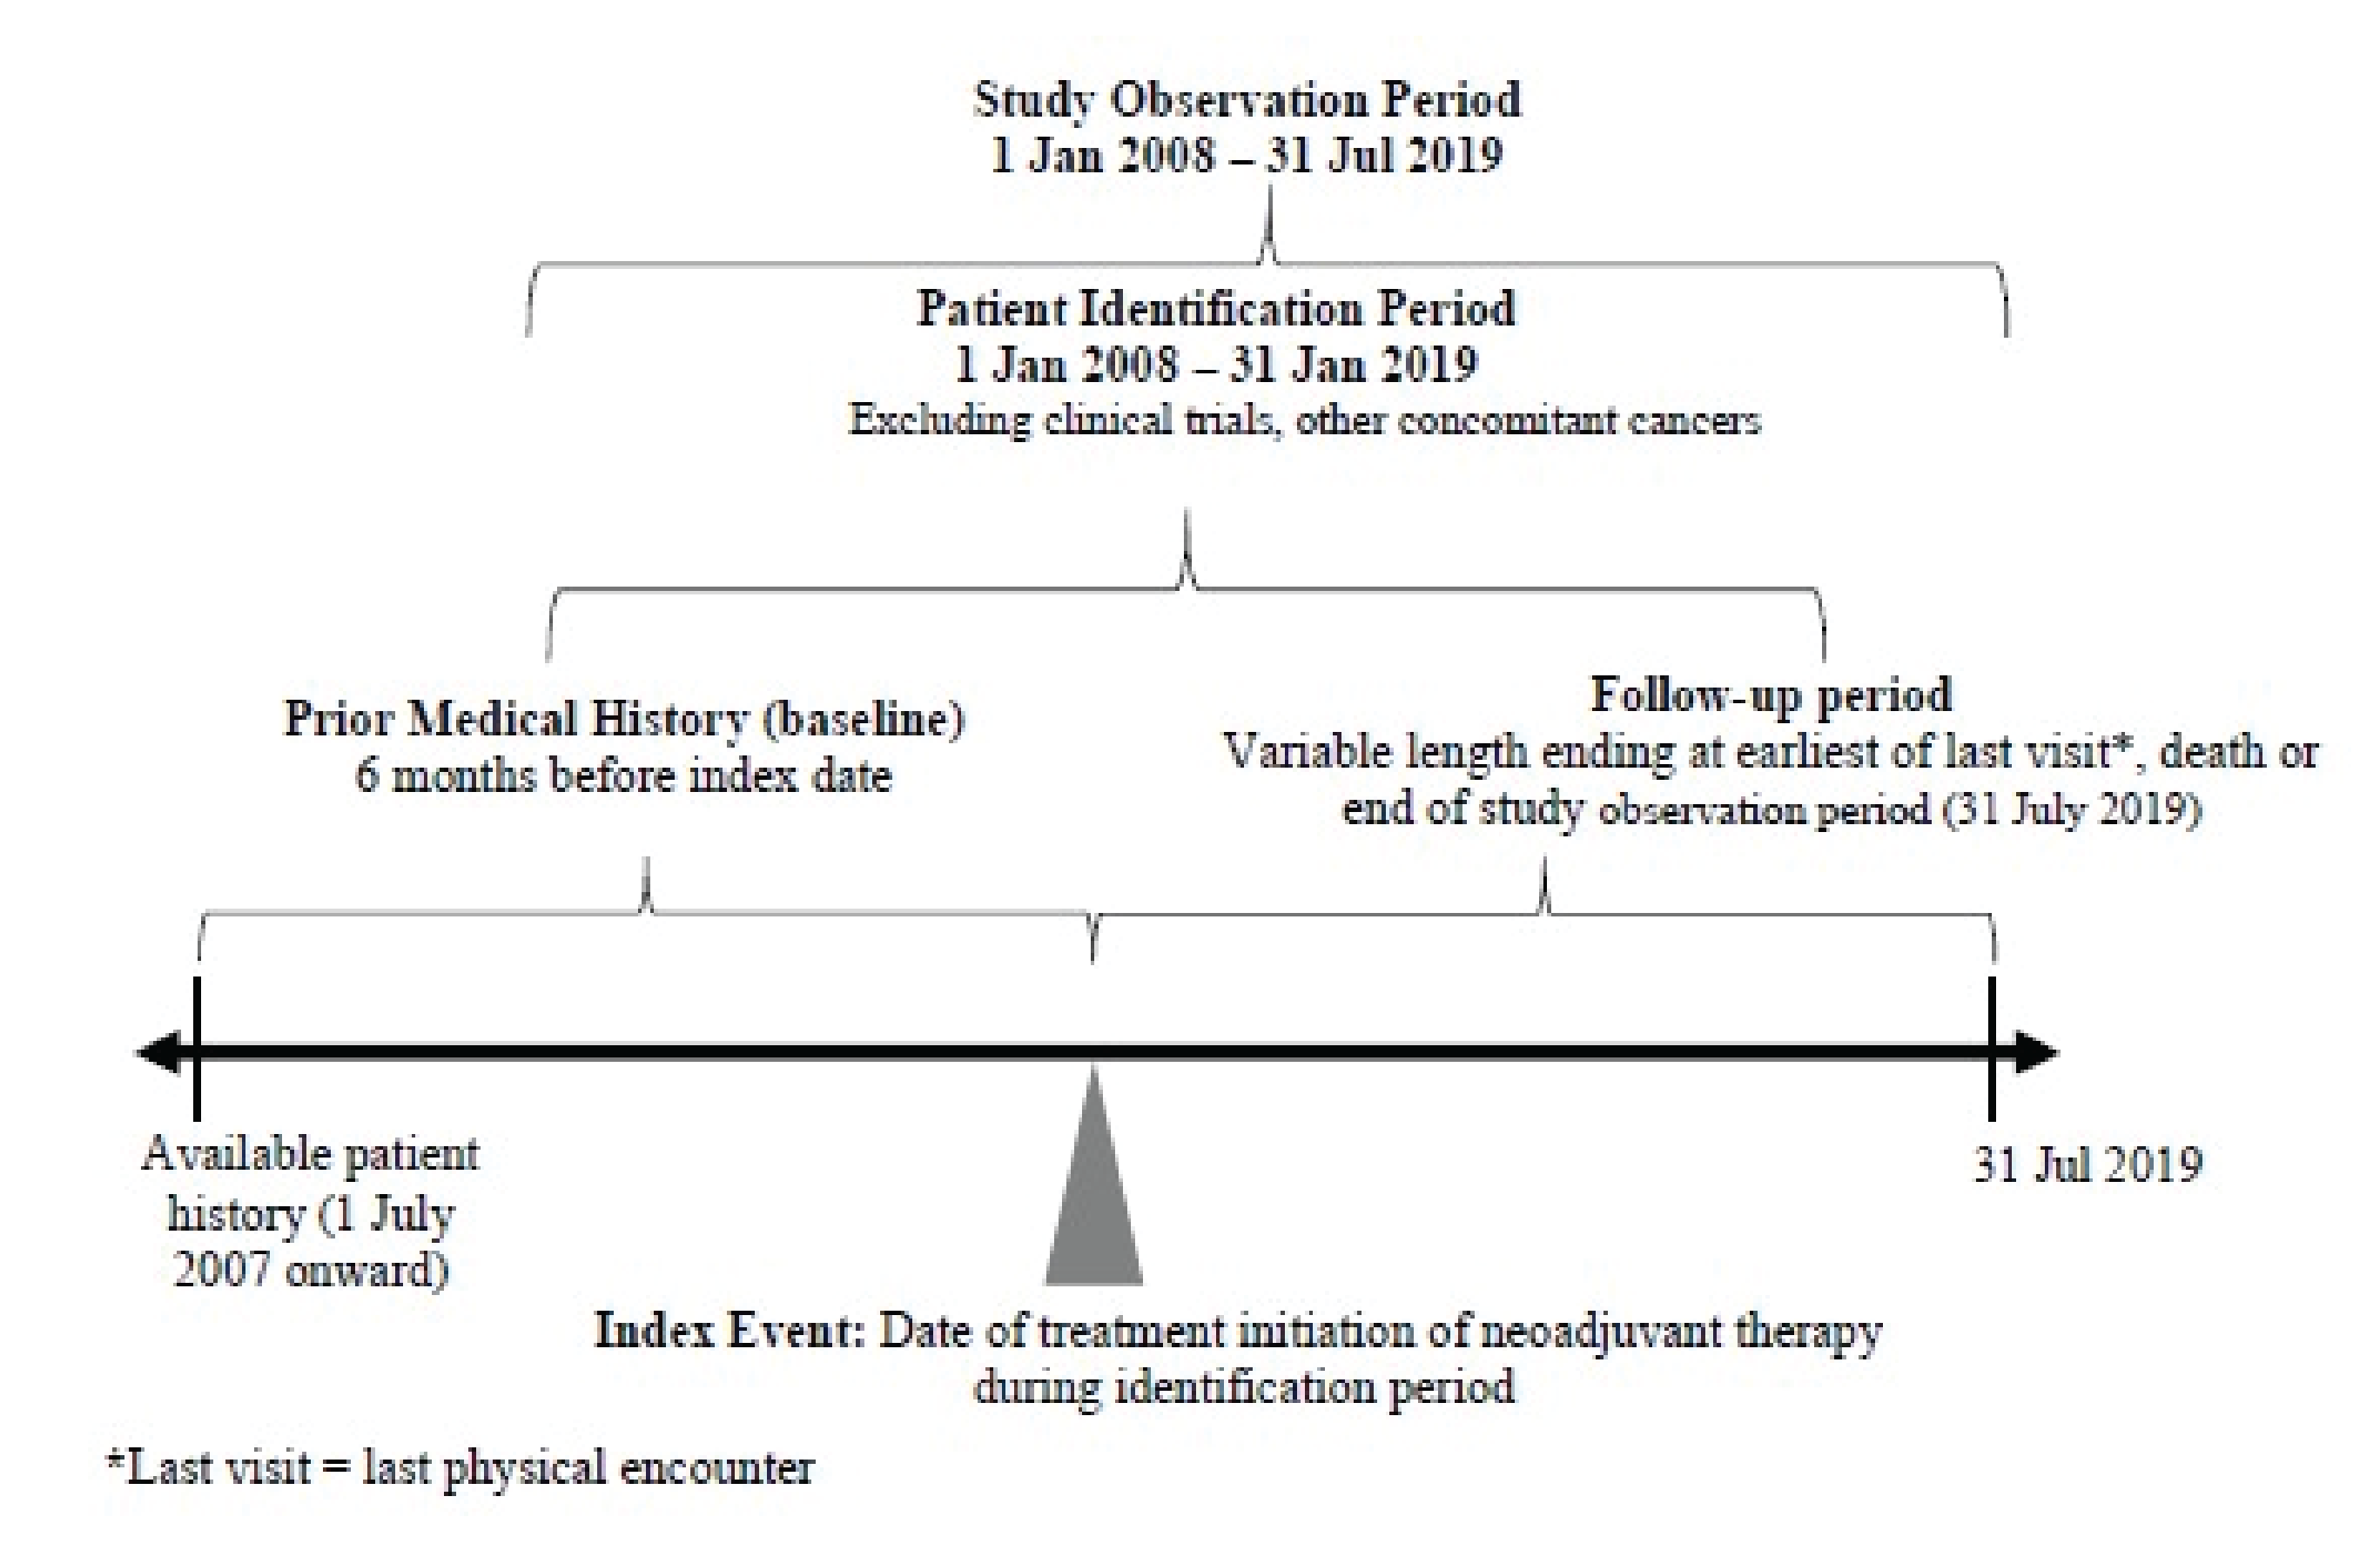 The figure presents the study flow of the observational study. Patient identification ran from January 1, 2008, to January 31, 2019. The study observation period ran from on January 1, 2008, to July 31, 2019. Patients were indexed at the first date of neoadjuvant treatment. The follow-up period varied from patient to patient, as it ended at the earliest of last visit, death, or end-of-study observation period, which was July 31, 2019.